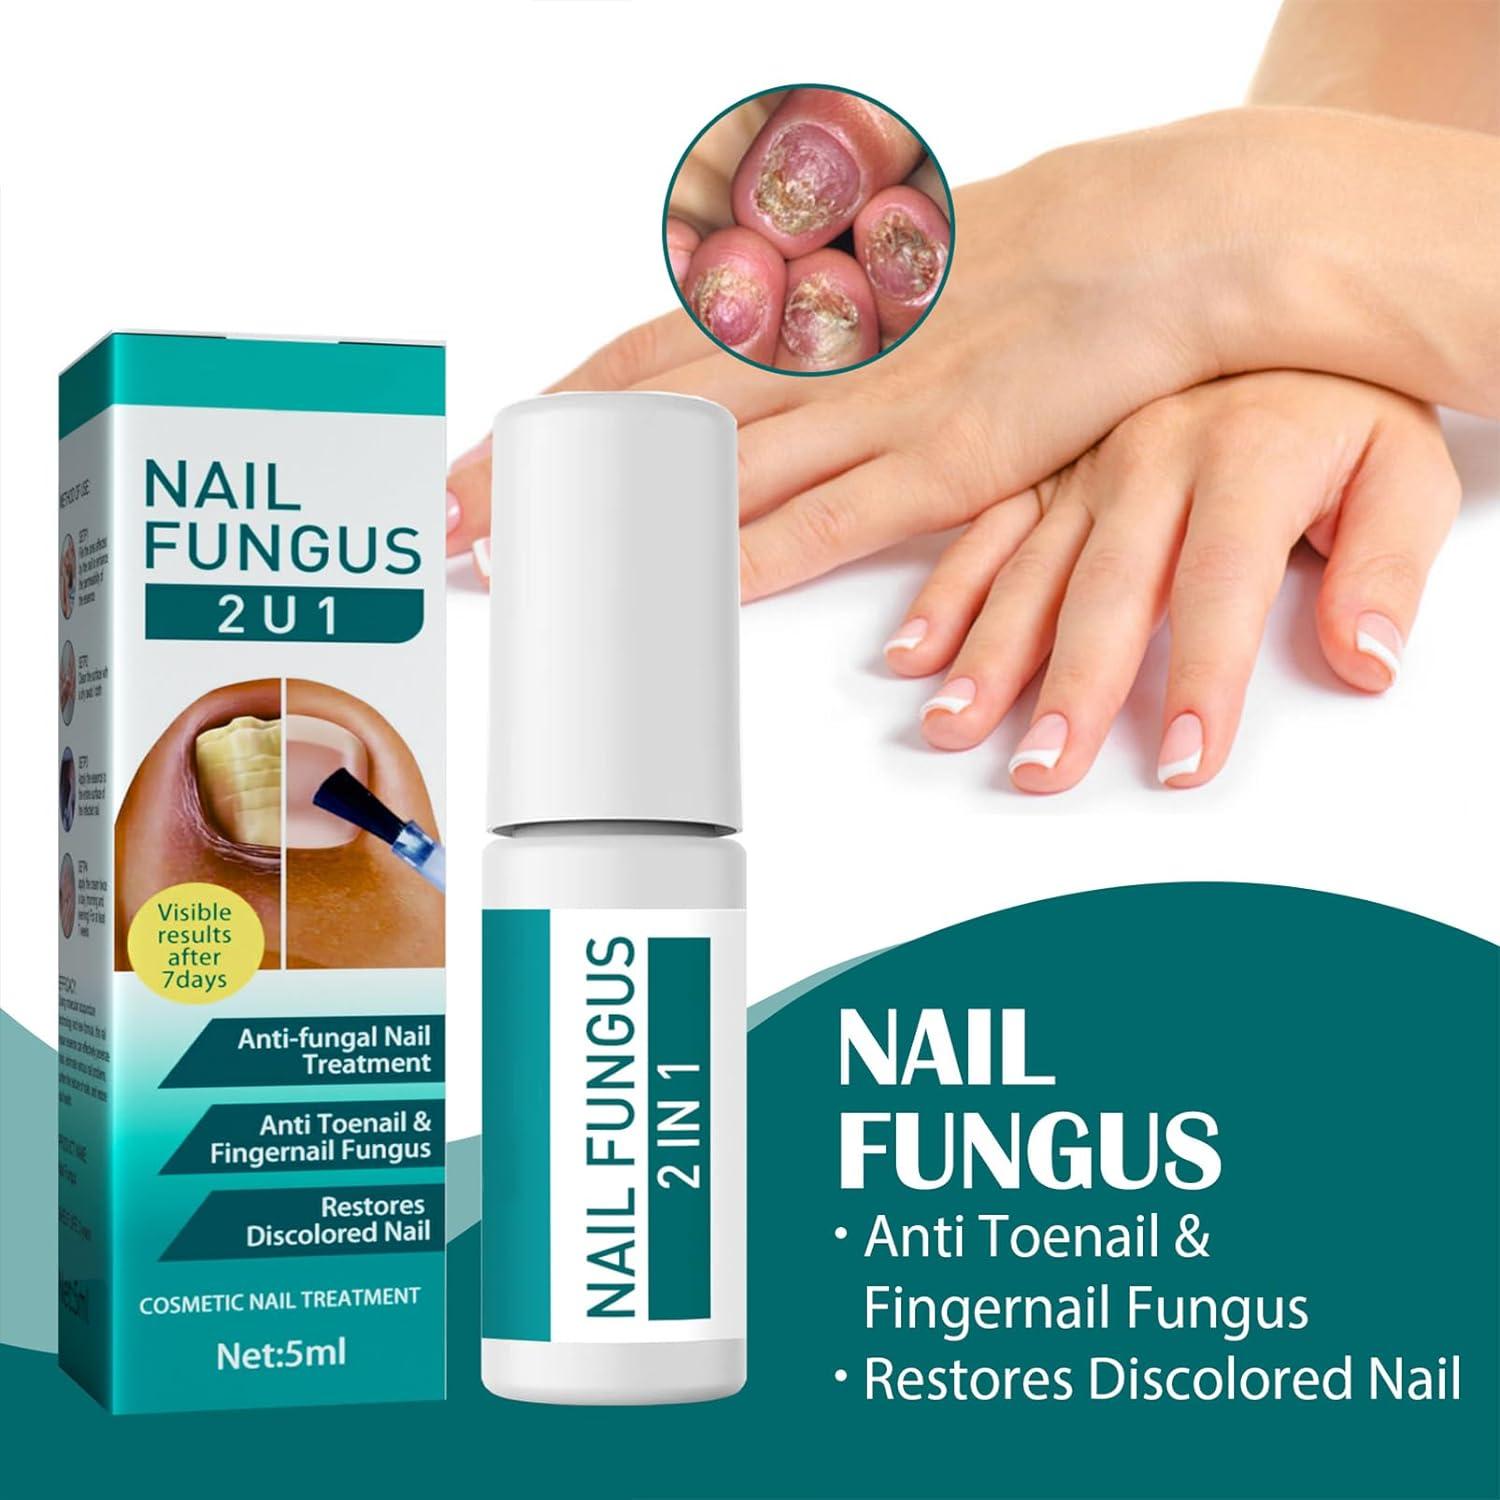 Tea tree oil for nail fungus: Effectiveness, side effects, and more